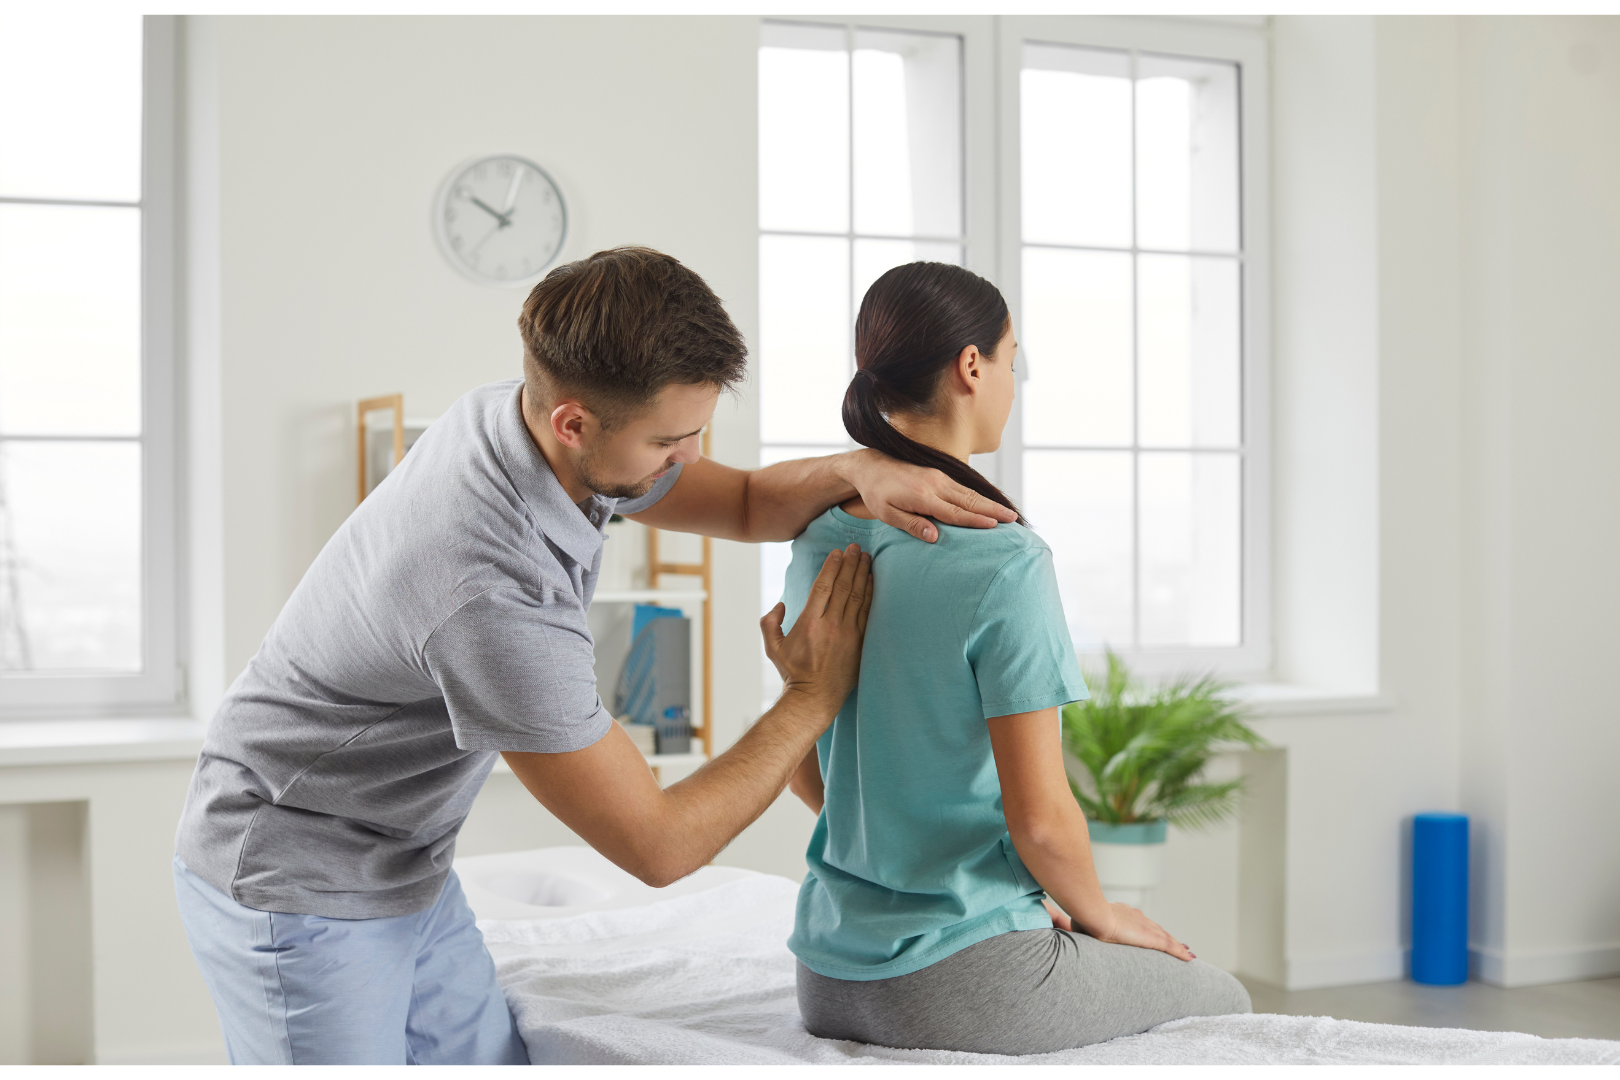 A person consulting with their chiropractor